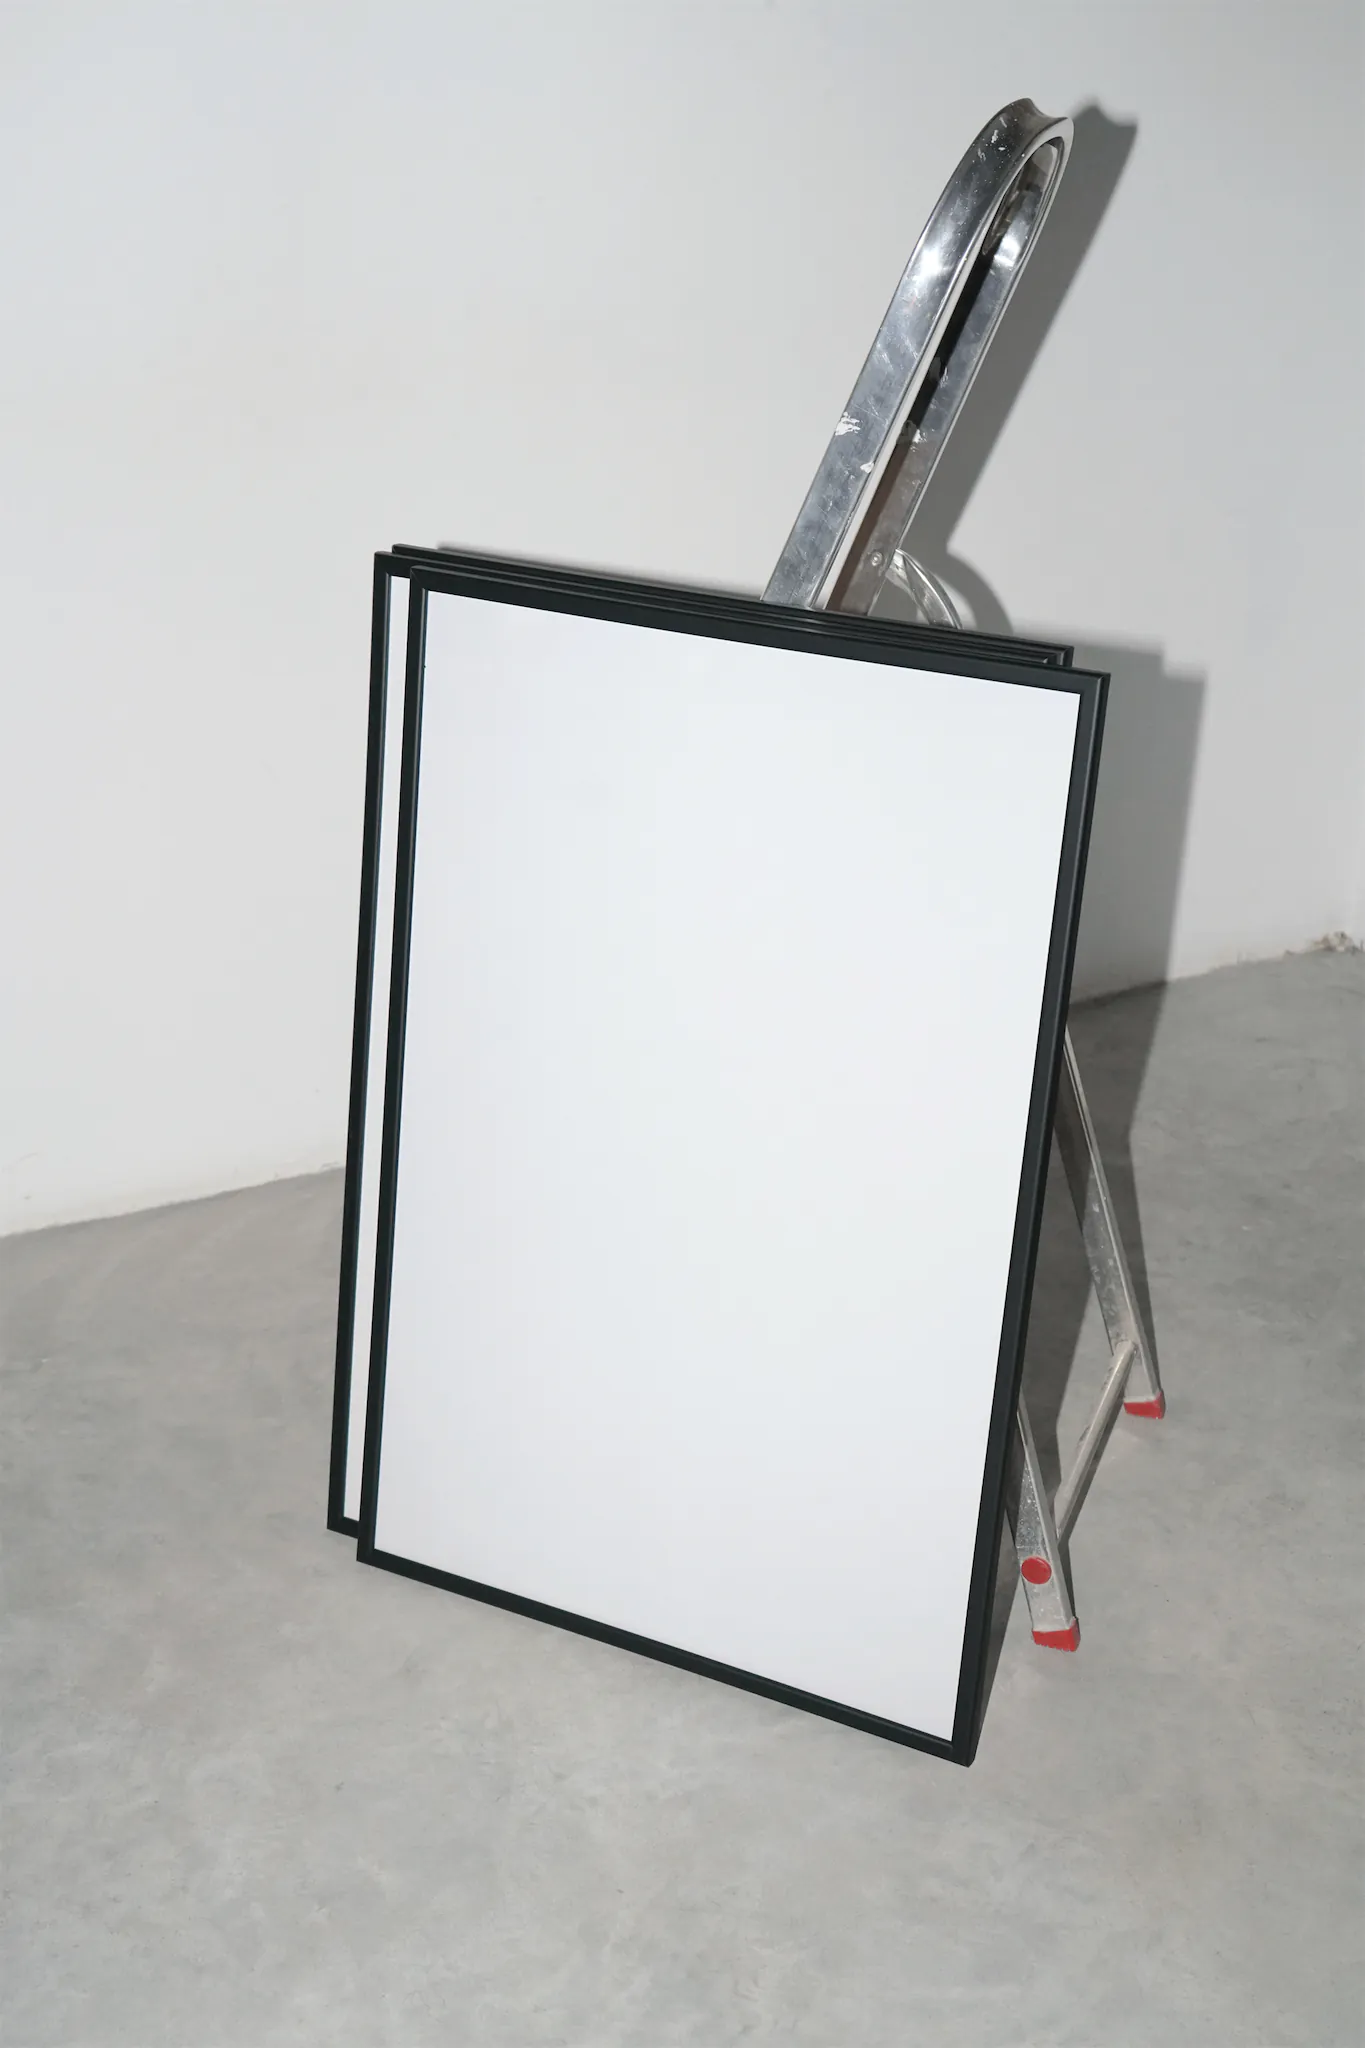 Set of framed poster mockups leaning against a ladder in a room with white walls and concrete floor